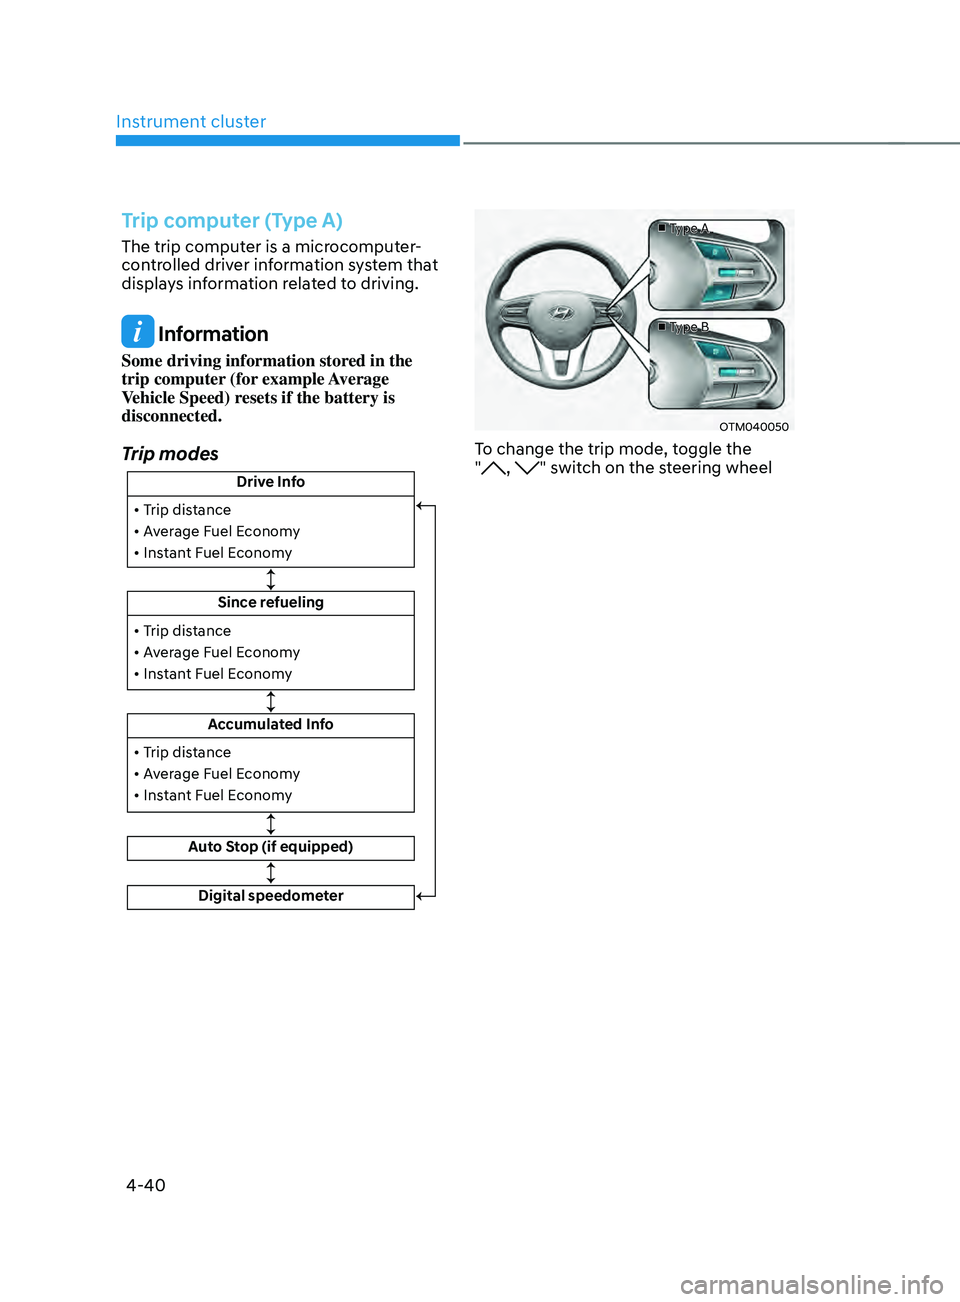 HYUNDAI SANTA FE 2021  Owners Manual Instrument cluster
4-40
Trip computer (Type A)
The trip computer is a microcomputer-
controlled driver information system that 
displays information related to driving.
 Information
Some driving infor